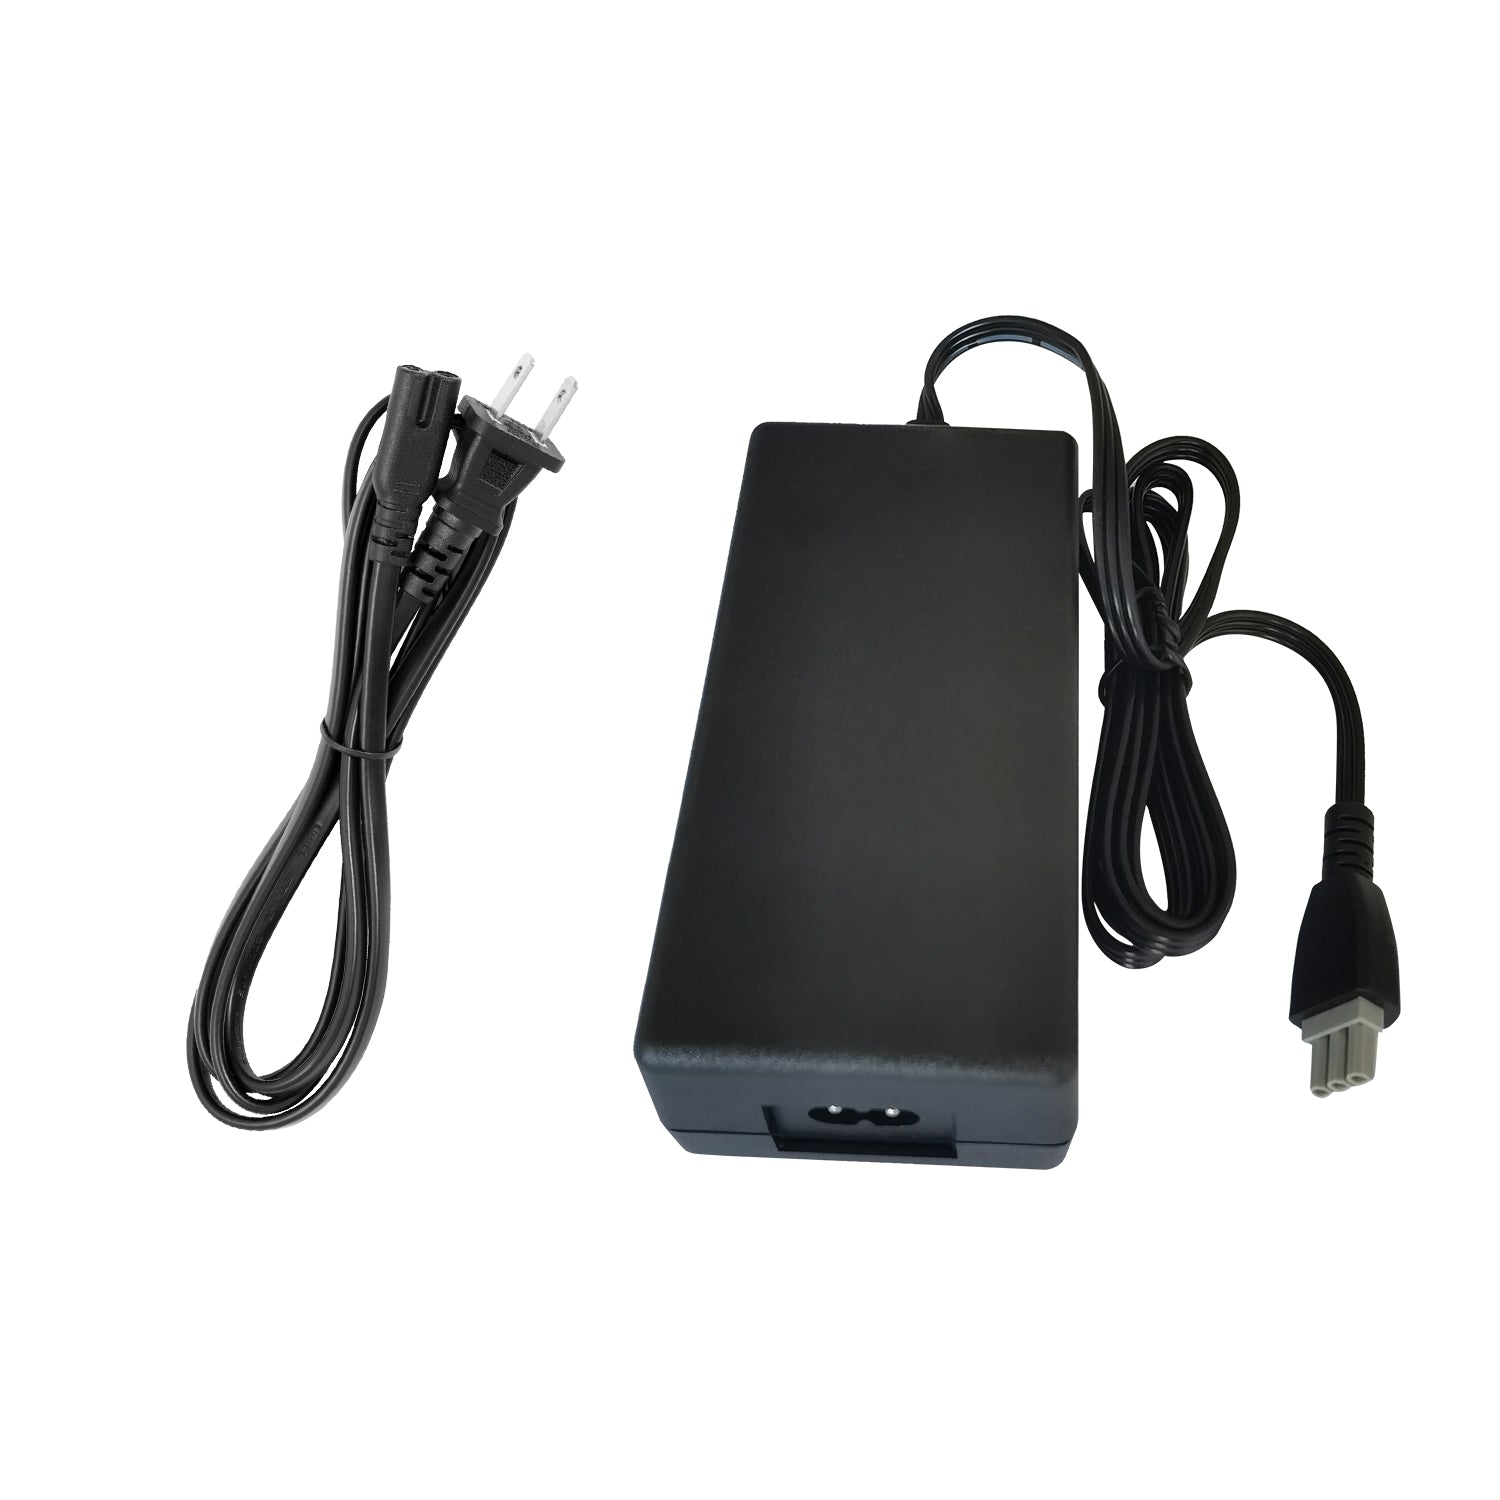 Power Adapter for hp officejet 5510xi Printer.